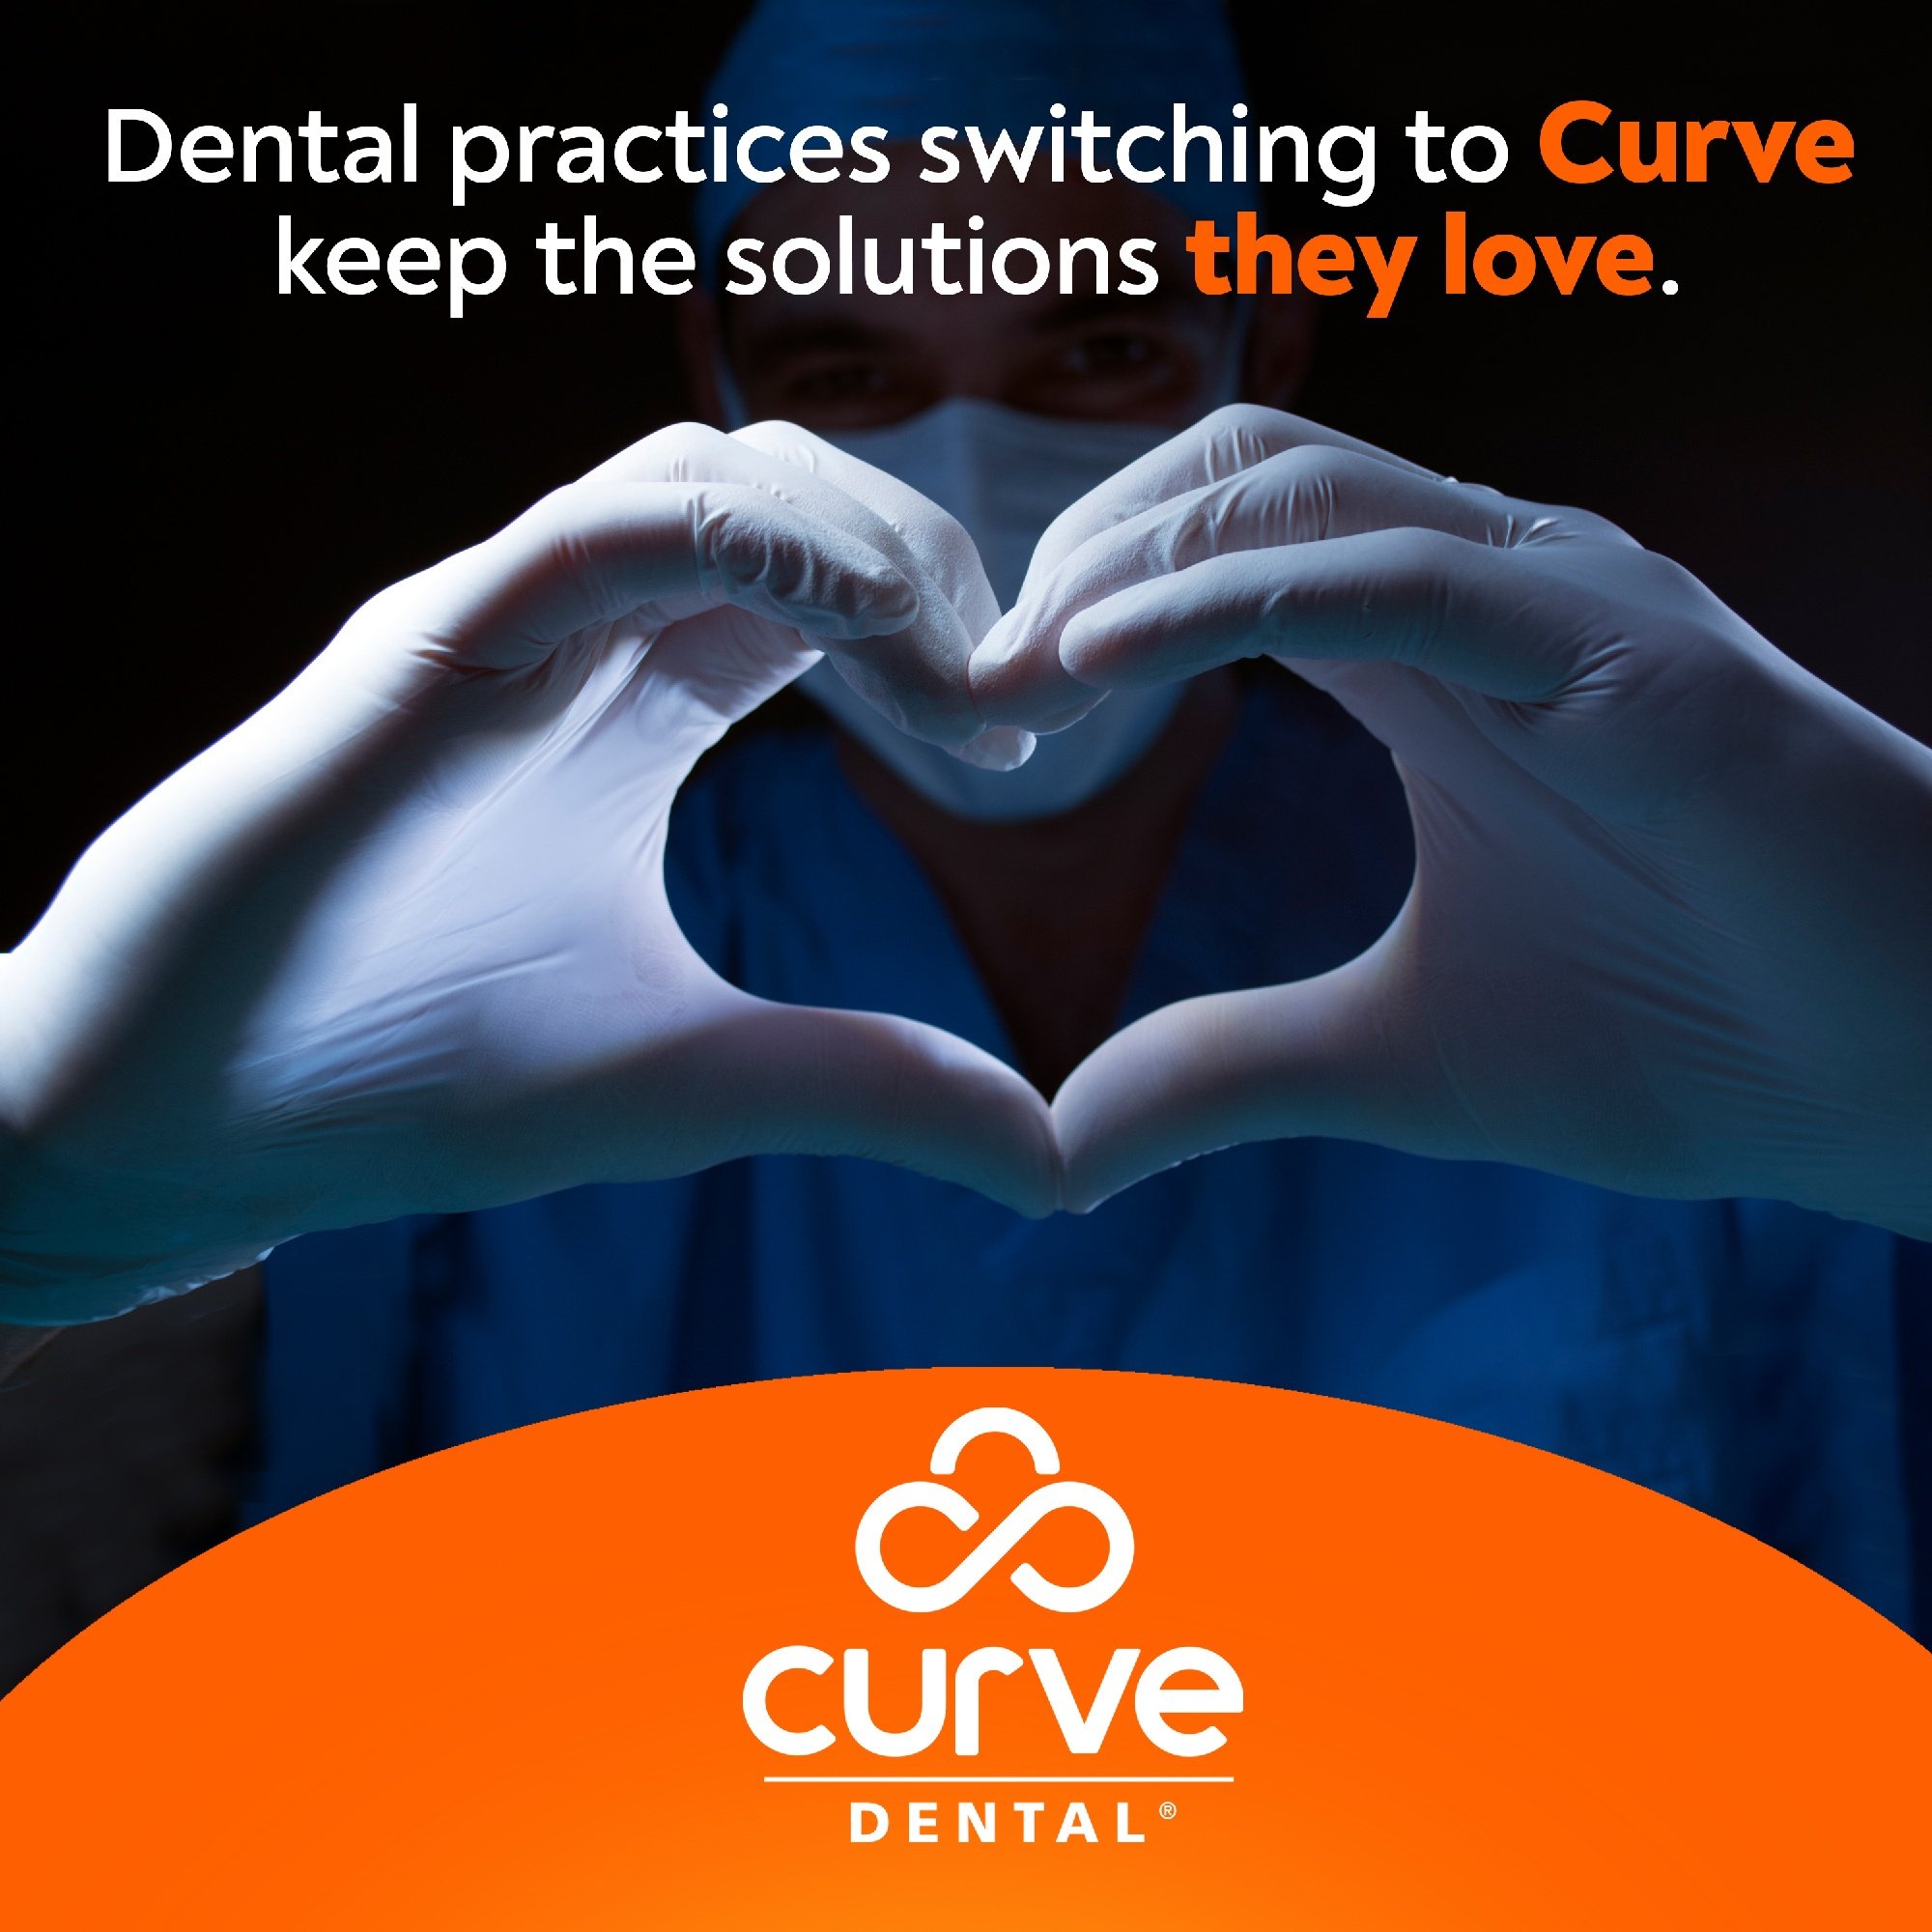 System Integration is Essential for Dental Practice Software Providers